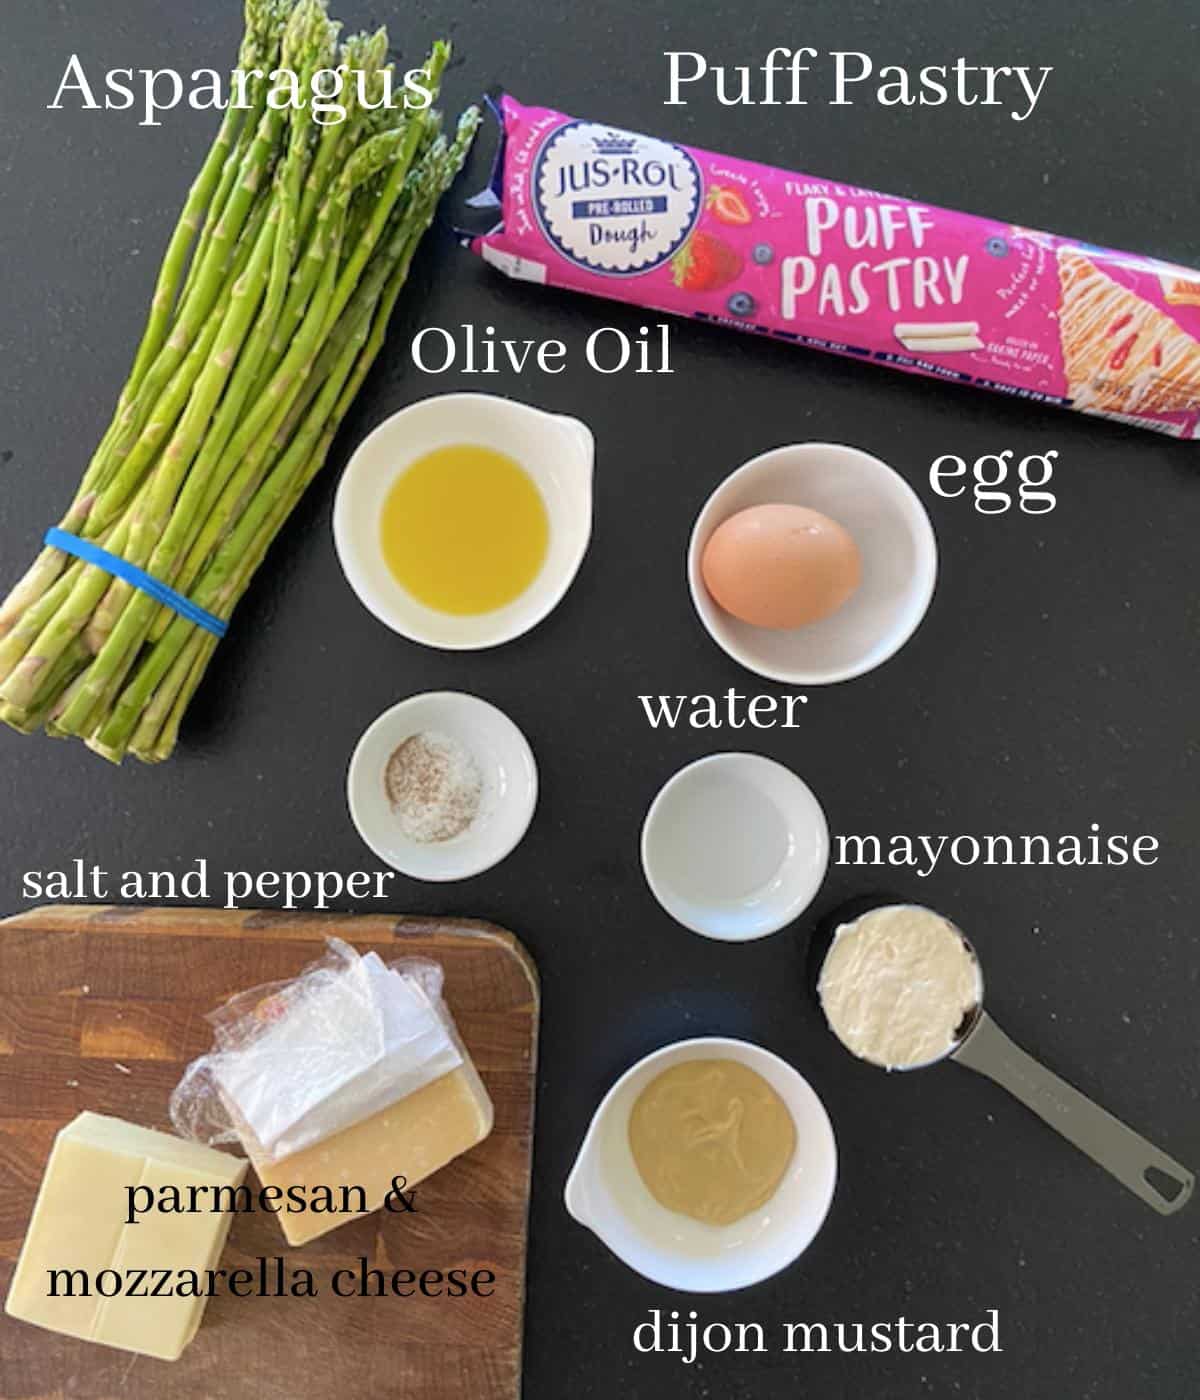 Asparagus puff pastry tart ingredients on countertop with text.